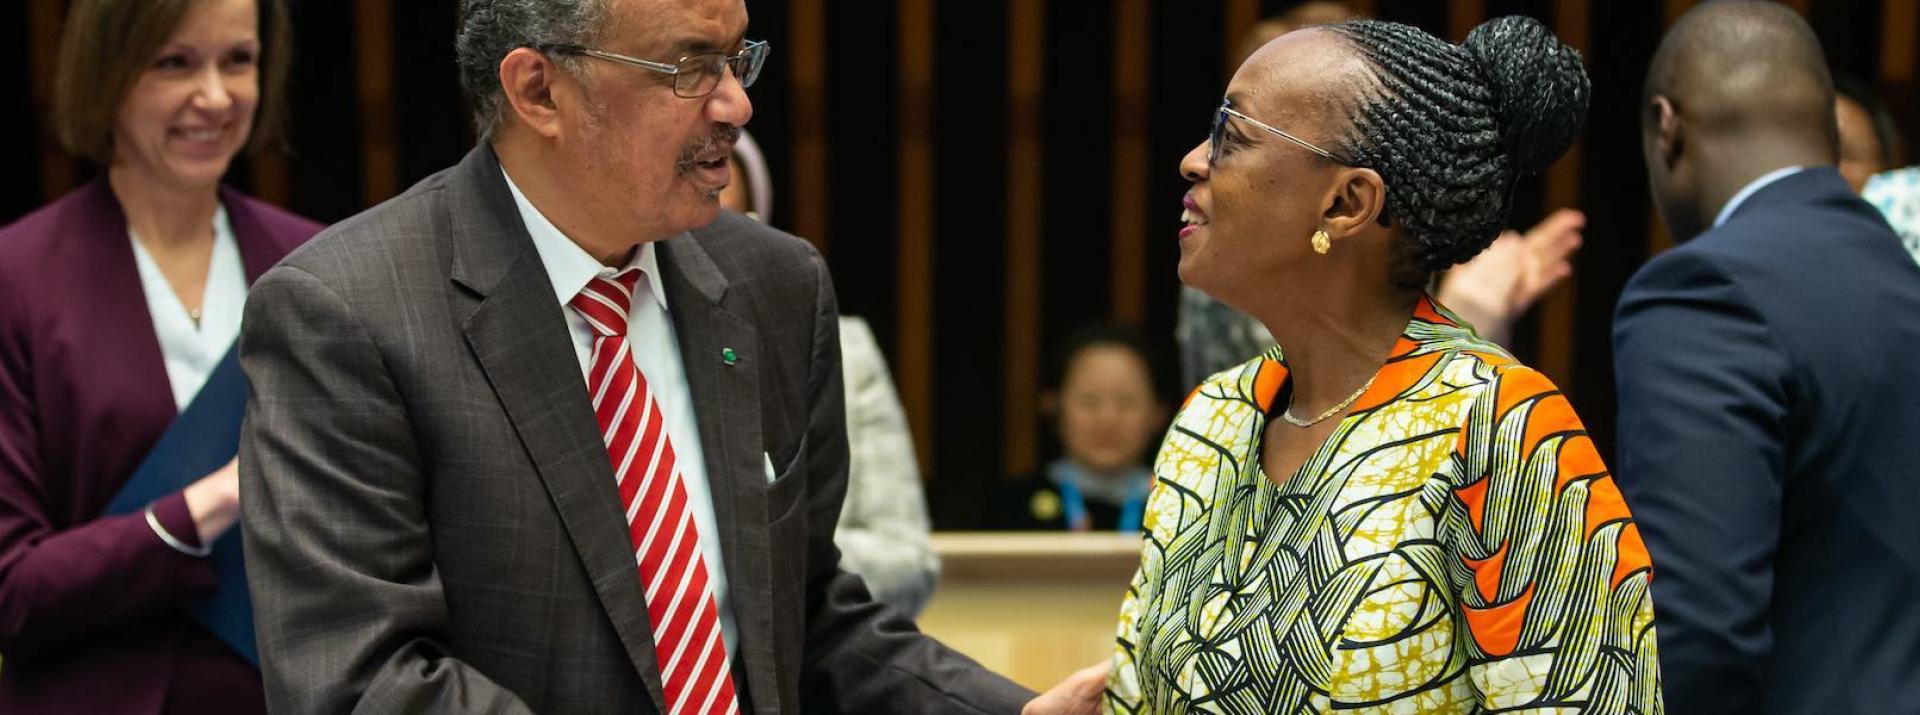 WHO Africa Regional Director gets new term, vows to step up universal health coverage